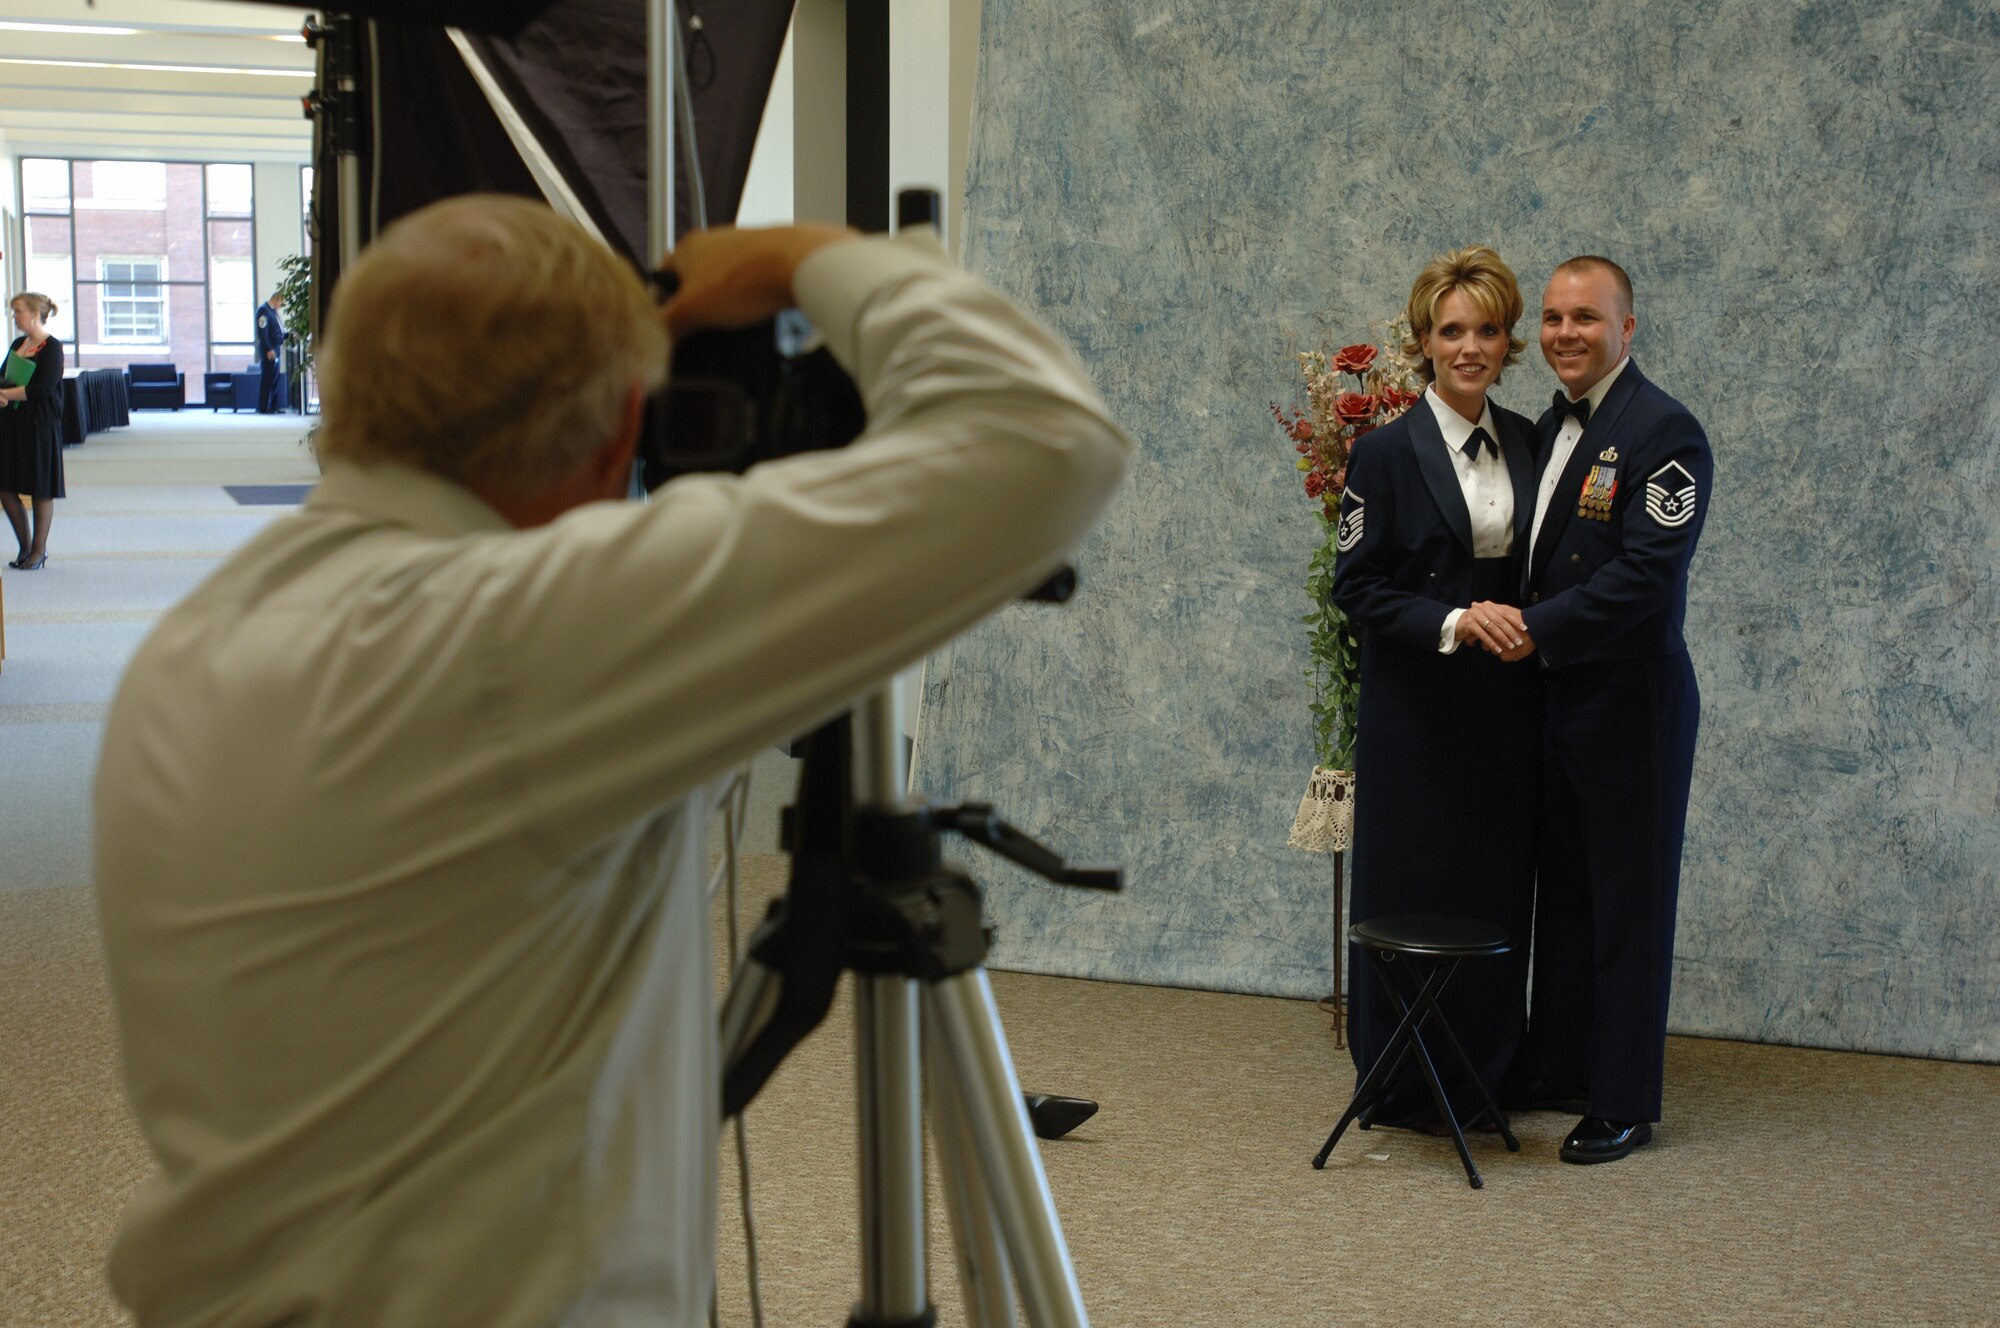 Master Sgts. LaRae Chapman, 75th Dental Squadron, and Kraig Chapman, 75th Operation Support Squadron, take some time to pose for the camera to capture their time during the Hill Air Force Base Air Force 60th Anniversary Ball celebration. (U.S. Air Force photo by Alex R. Lloyd)

